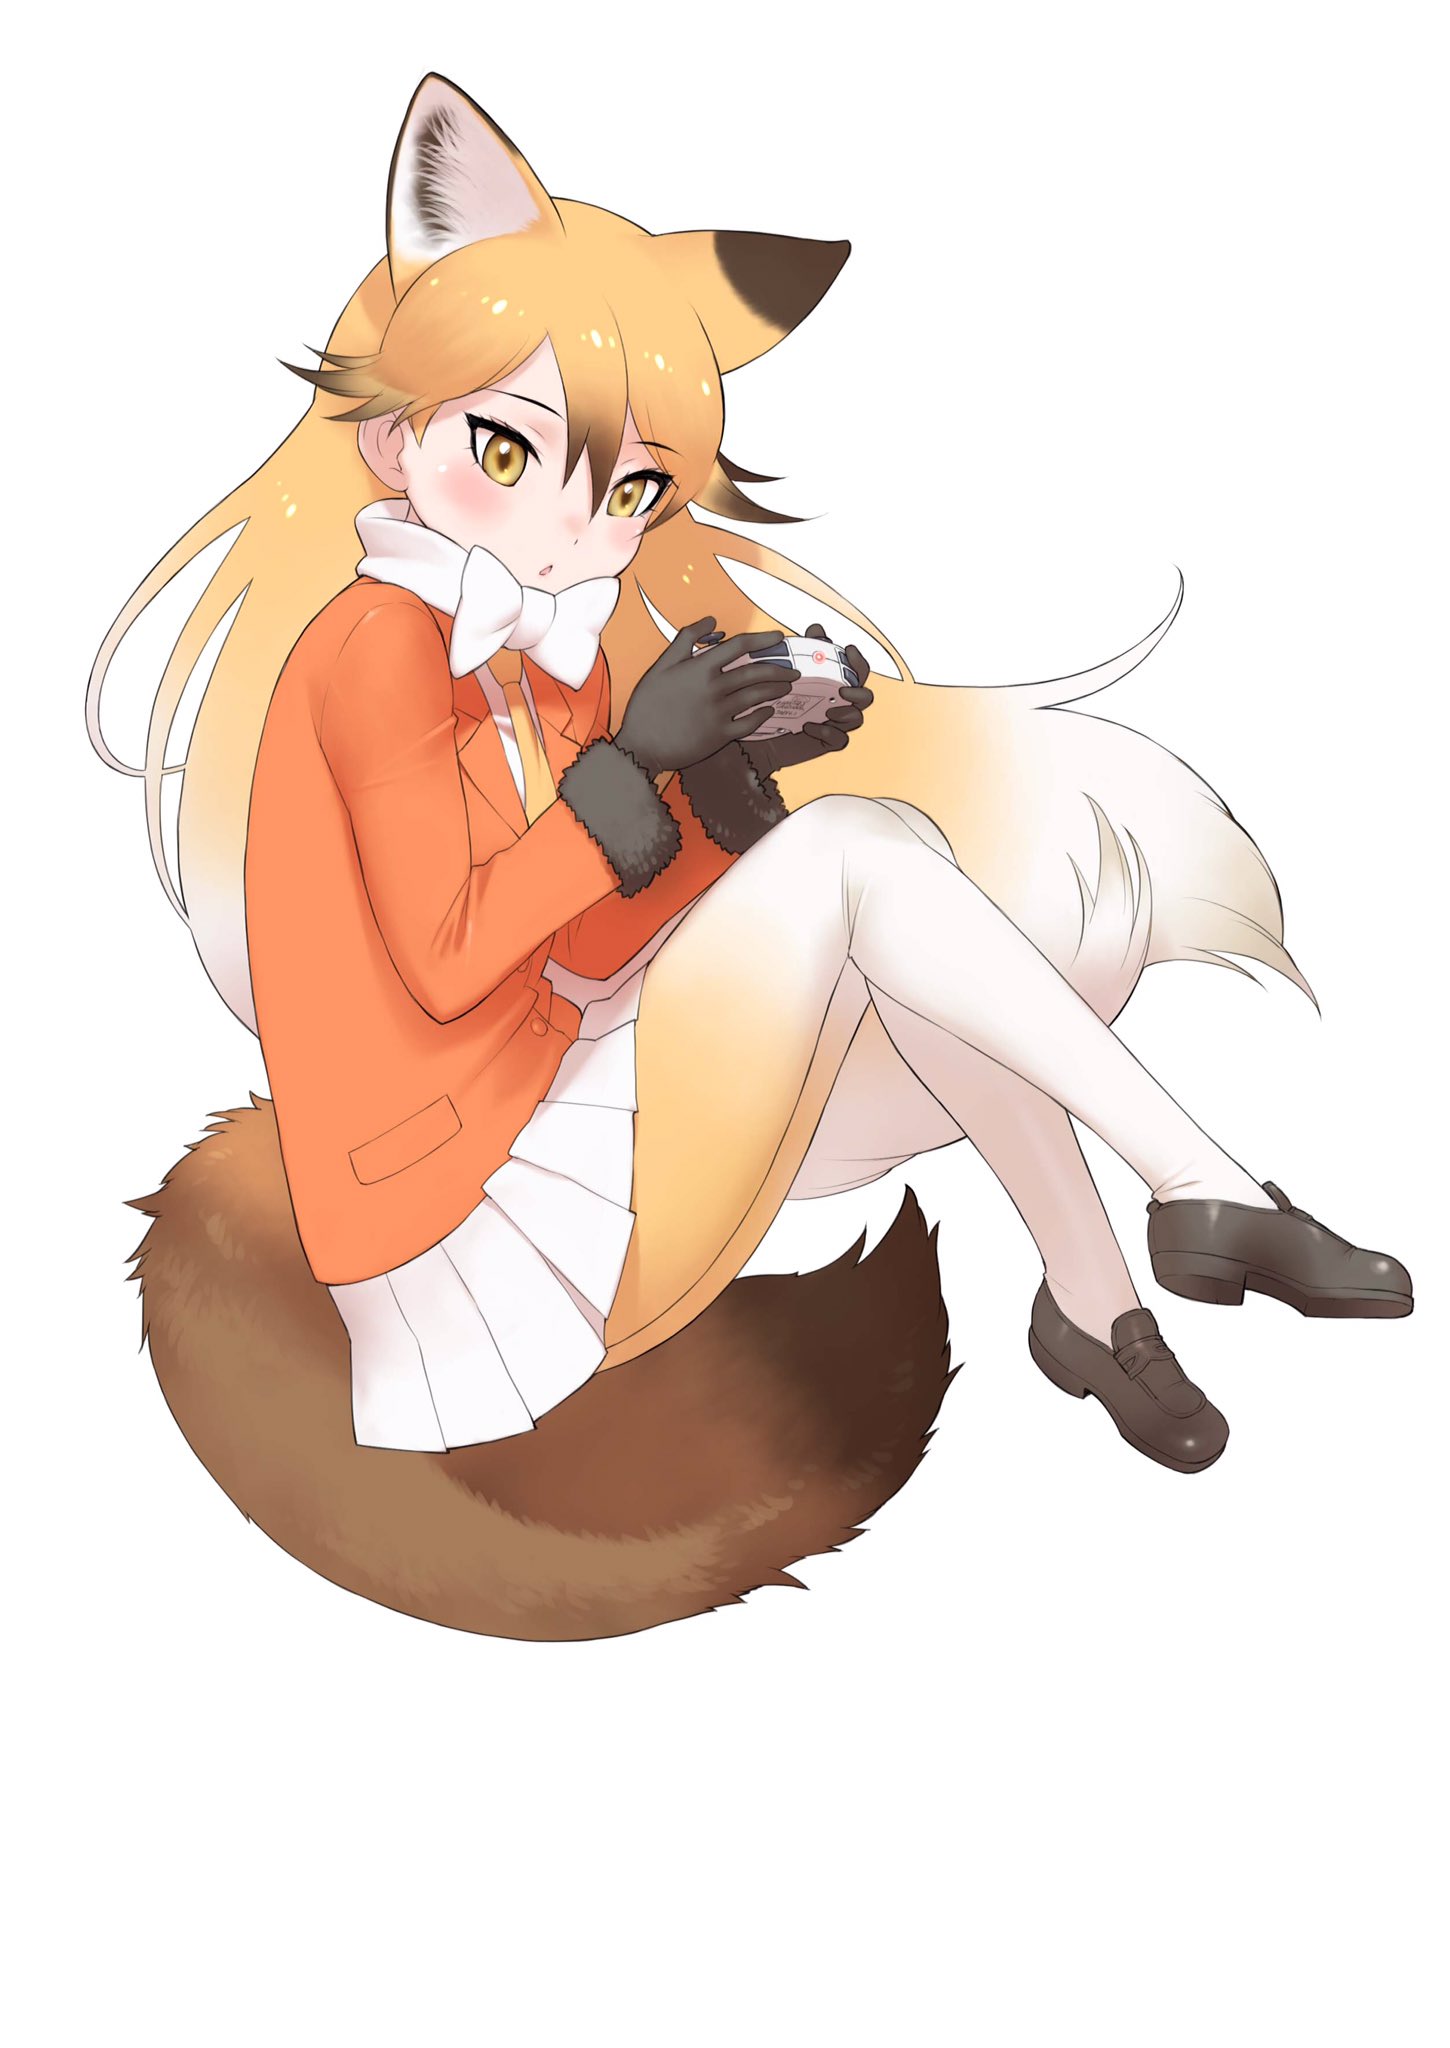 A Mine Yoshizaki illustration of Ezo Red Fox playing a video game. Created for use in a WIXOSS trading card as part of a collaboration with the franchise. Posted to Twitter by the Kemono Friends official Twitter account.